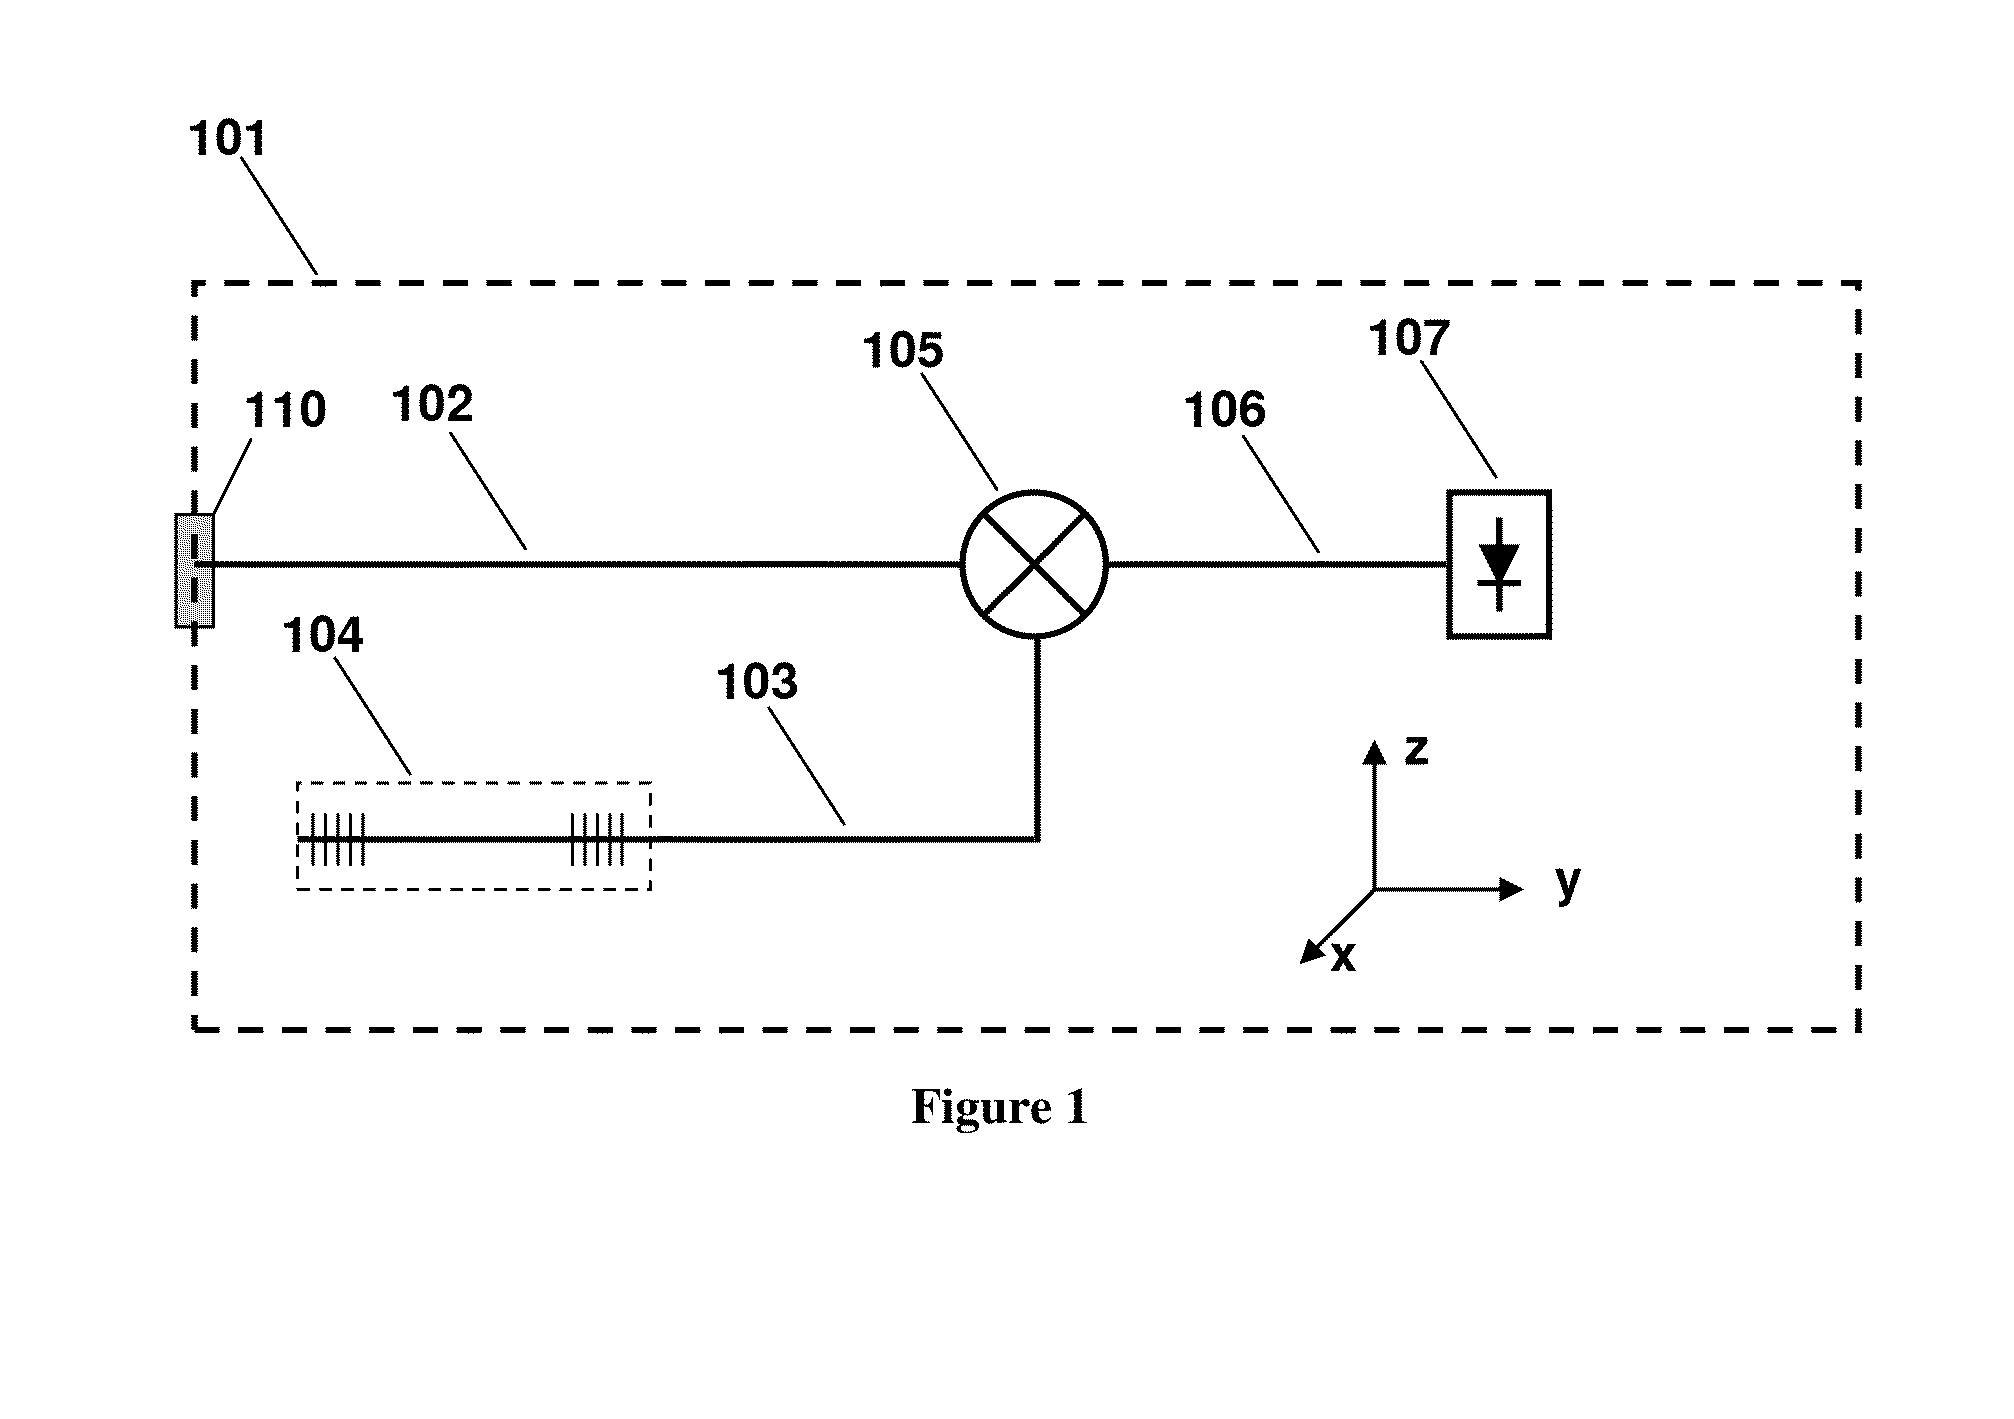 Monolithic widely-tunable coherent receiver